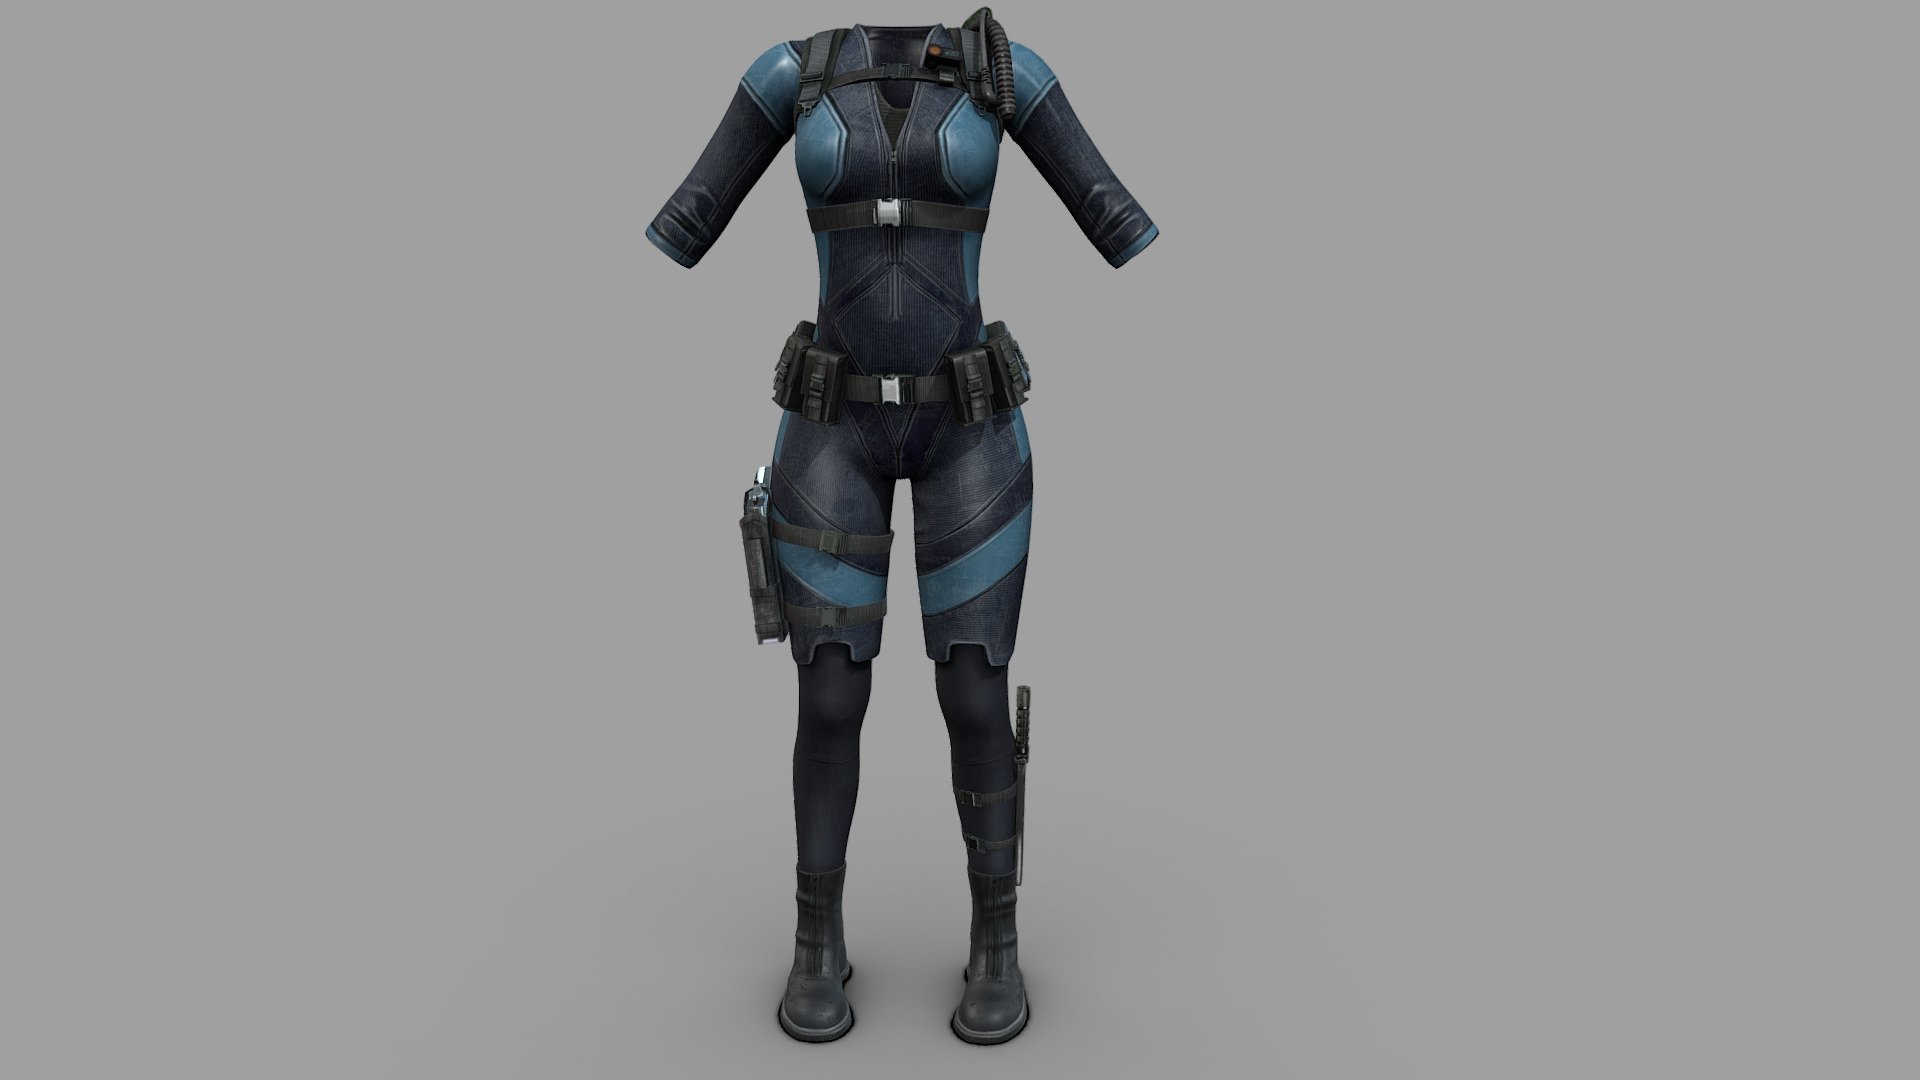 SAVE Female Sci-fi Full Combat Uniform Outfit - Buy Royalty Free